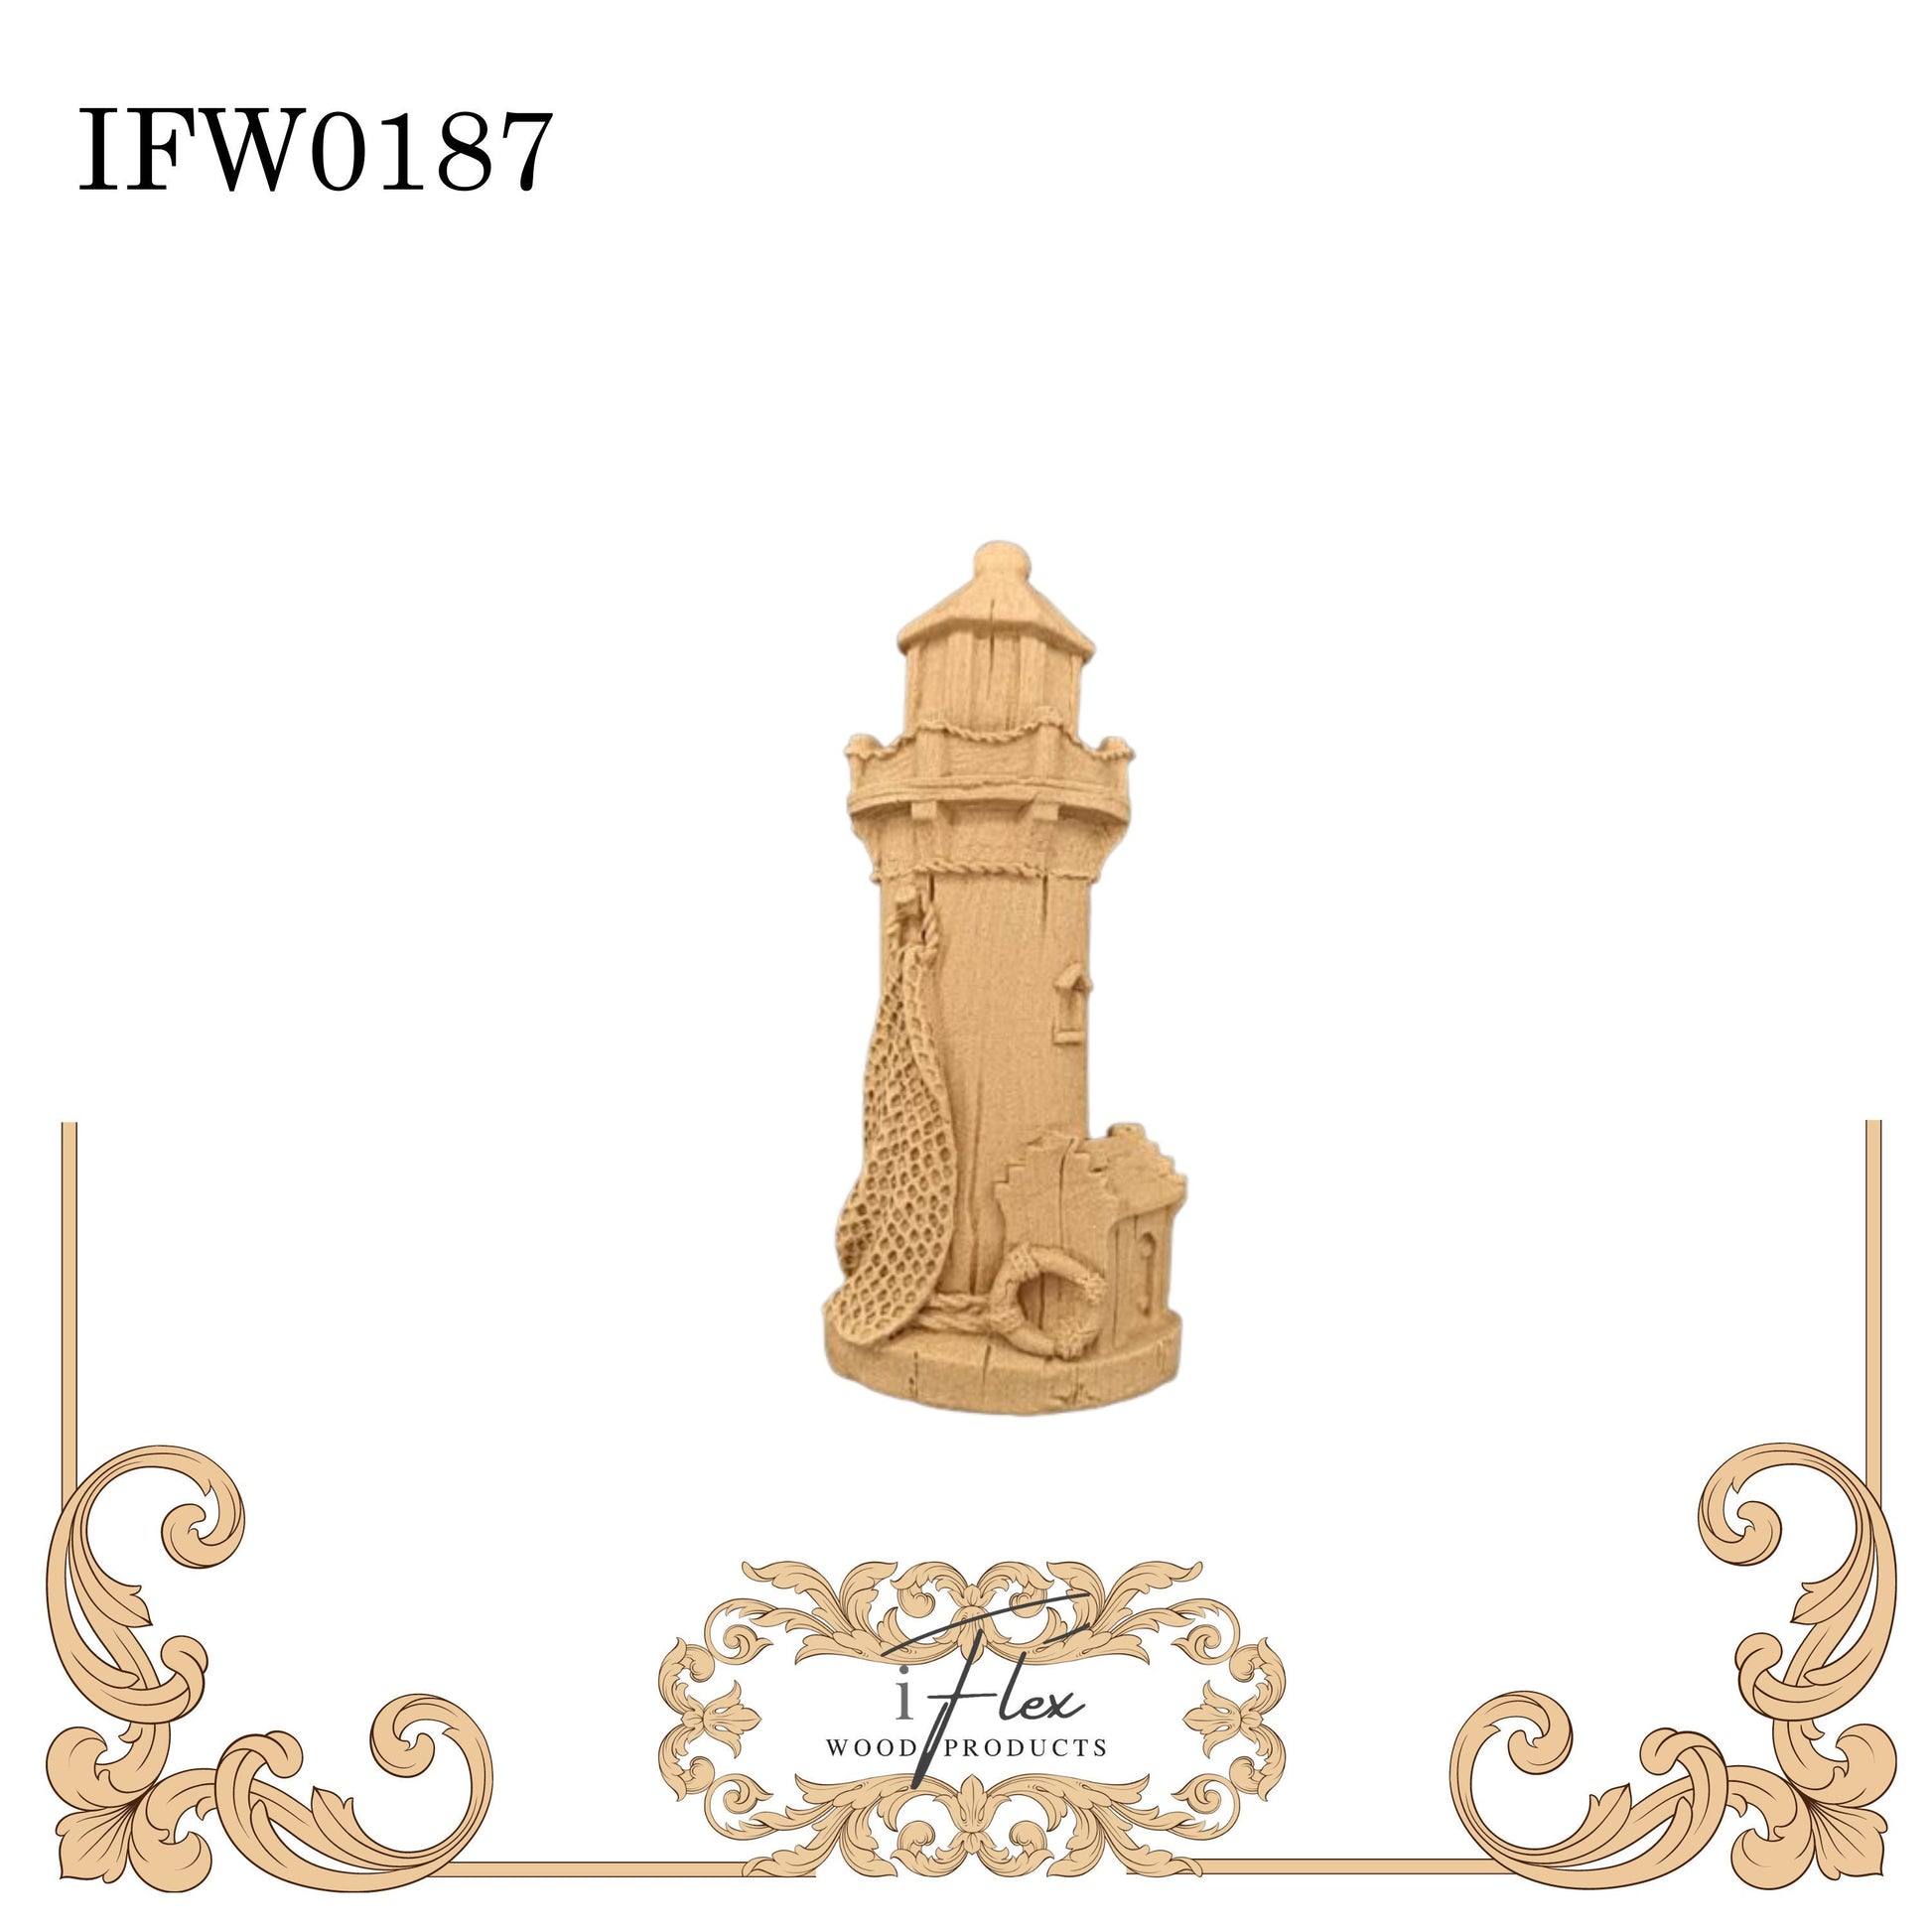 IFW 0187  iFlex Wood Products Lighthouse, Nautical bendable mouldings, flexible, wooden appliques